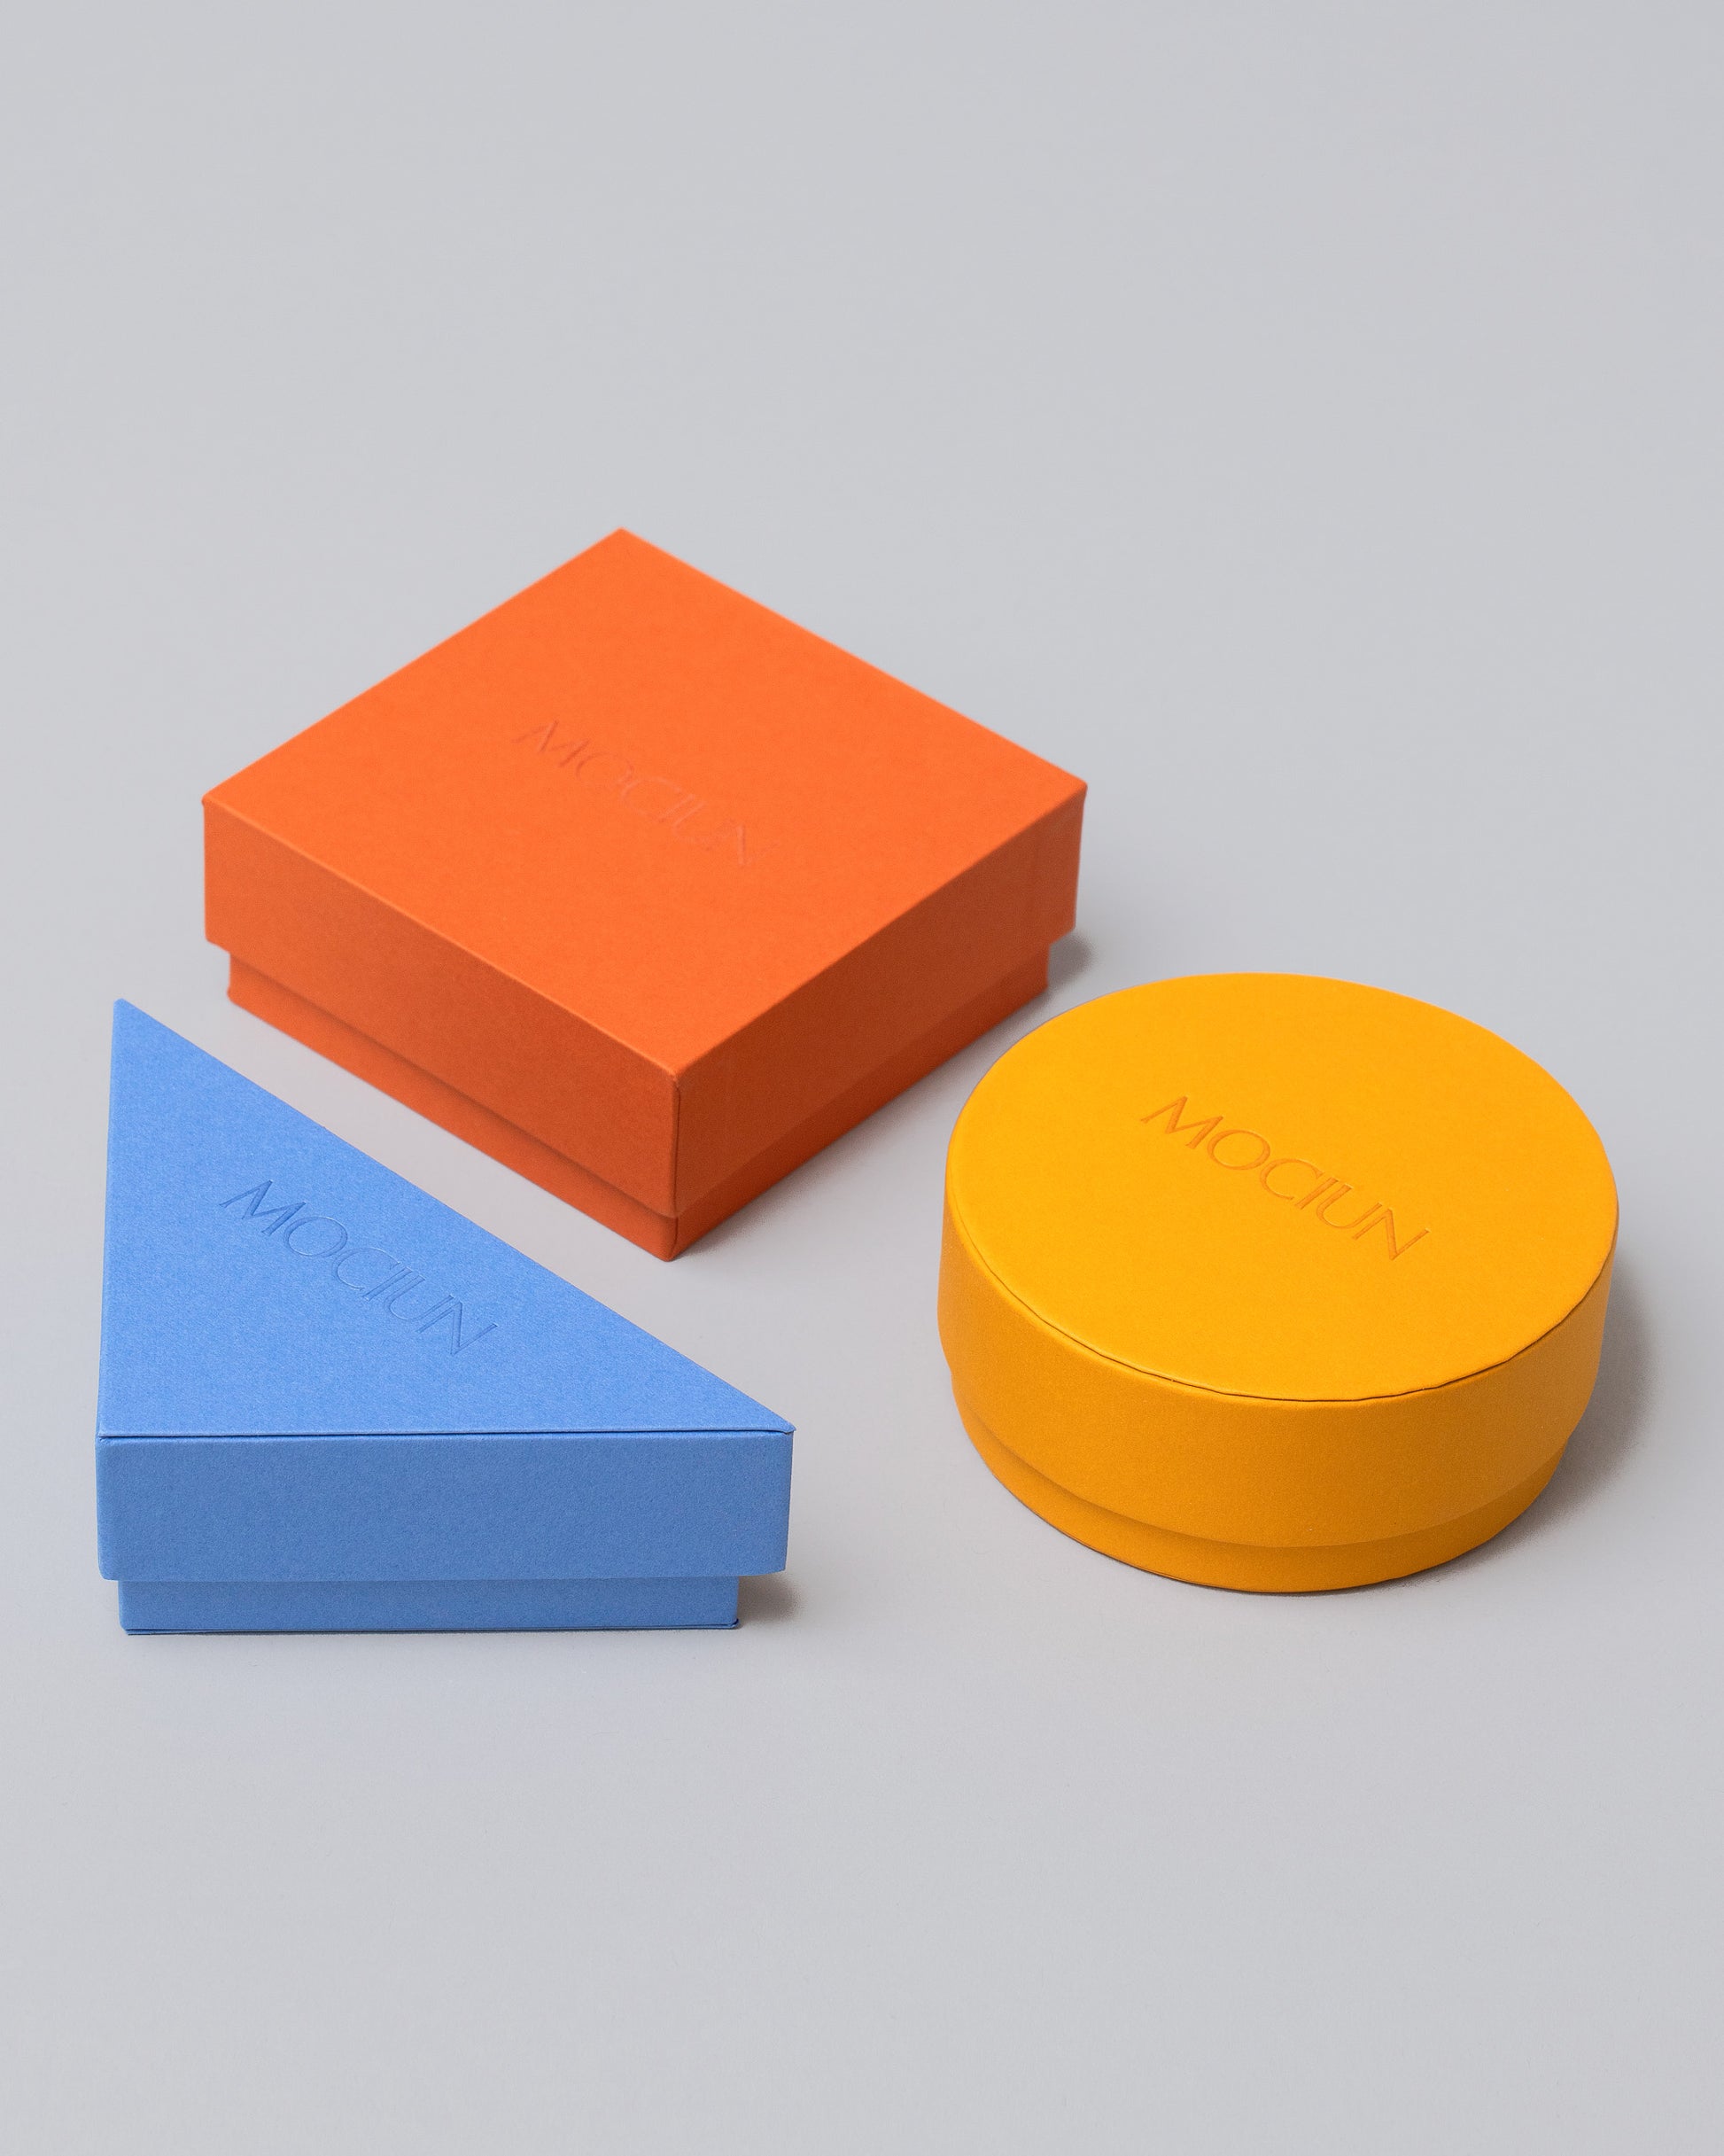 Group of Blue, Orange and Yellow Standard Boxes on light color background.